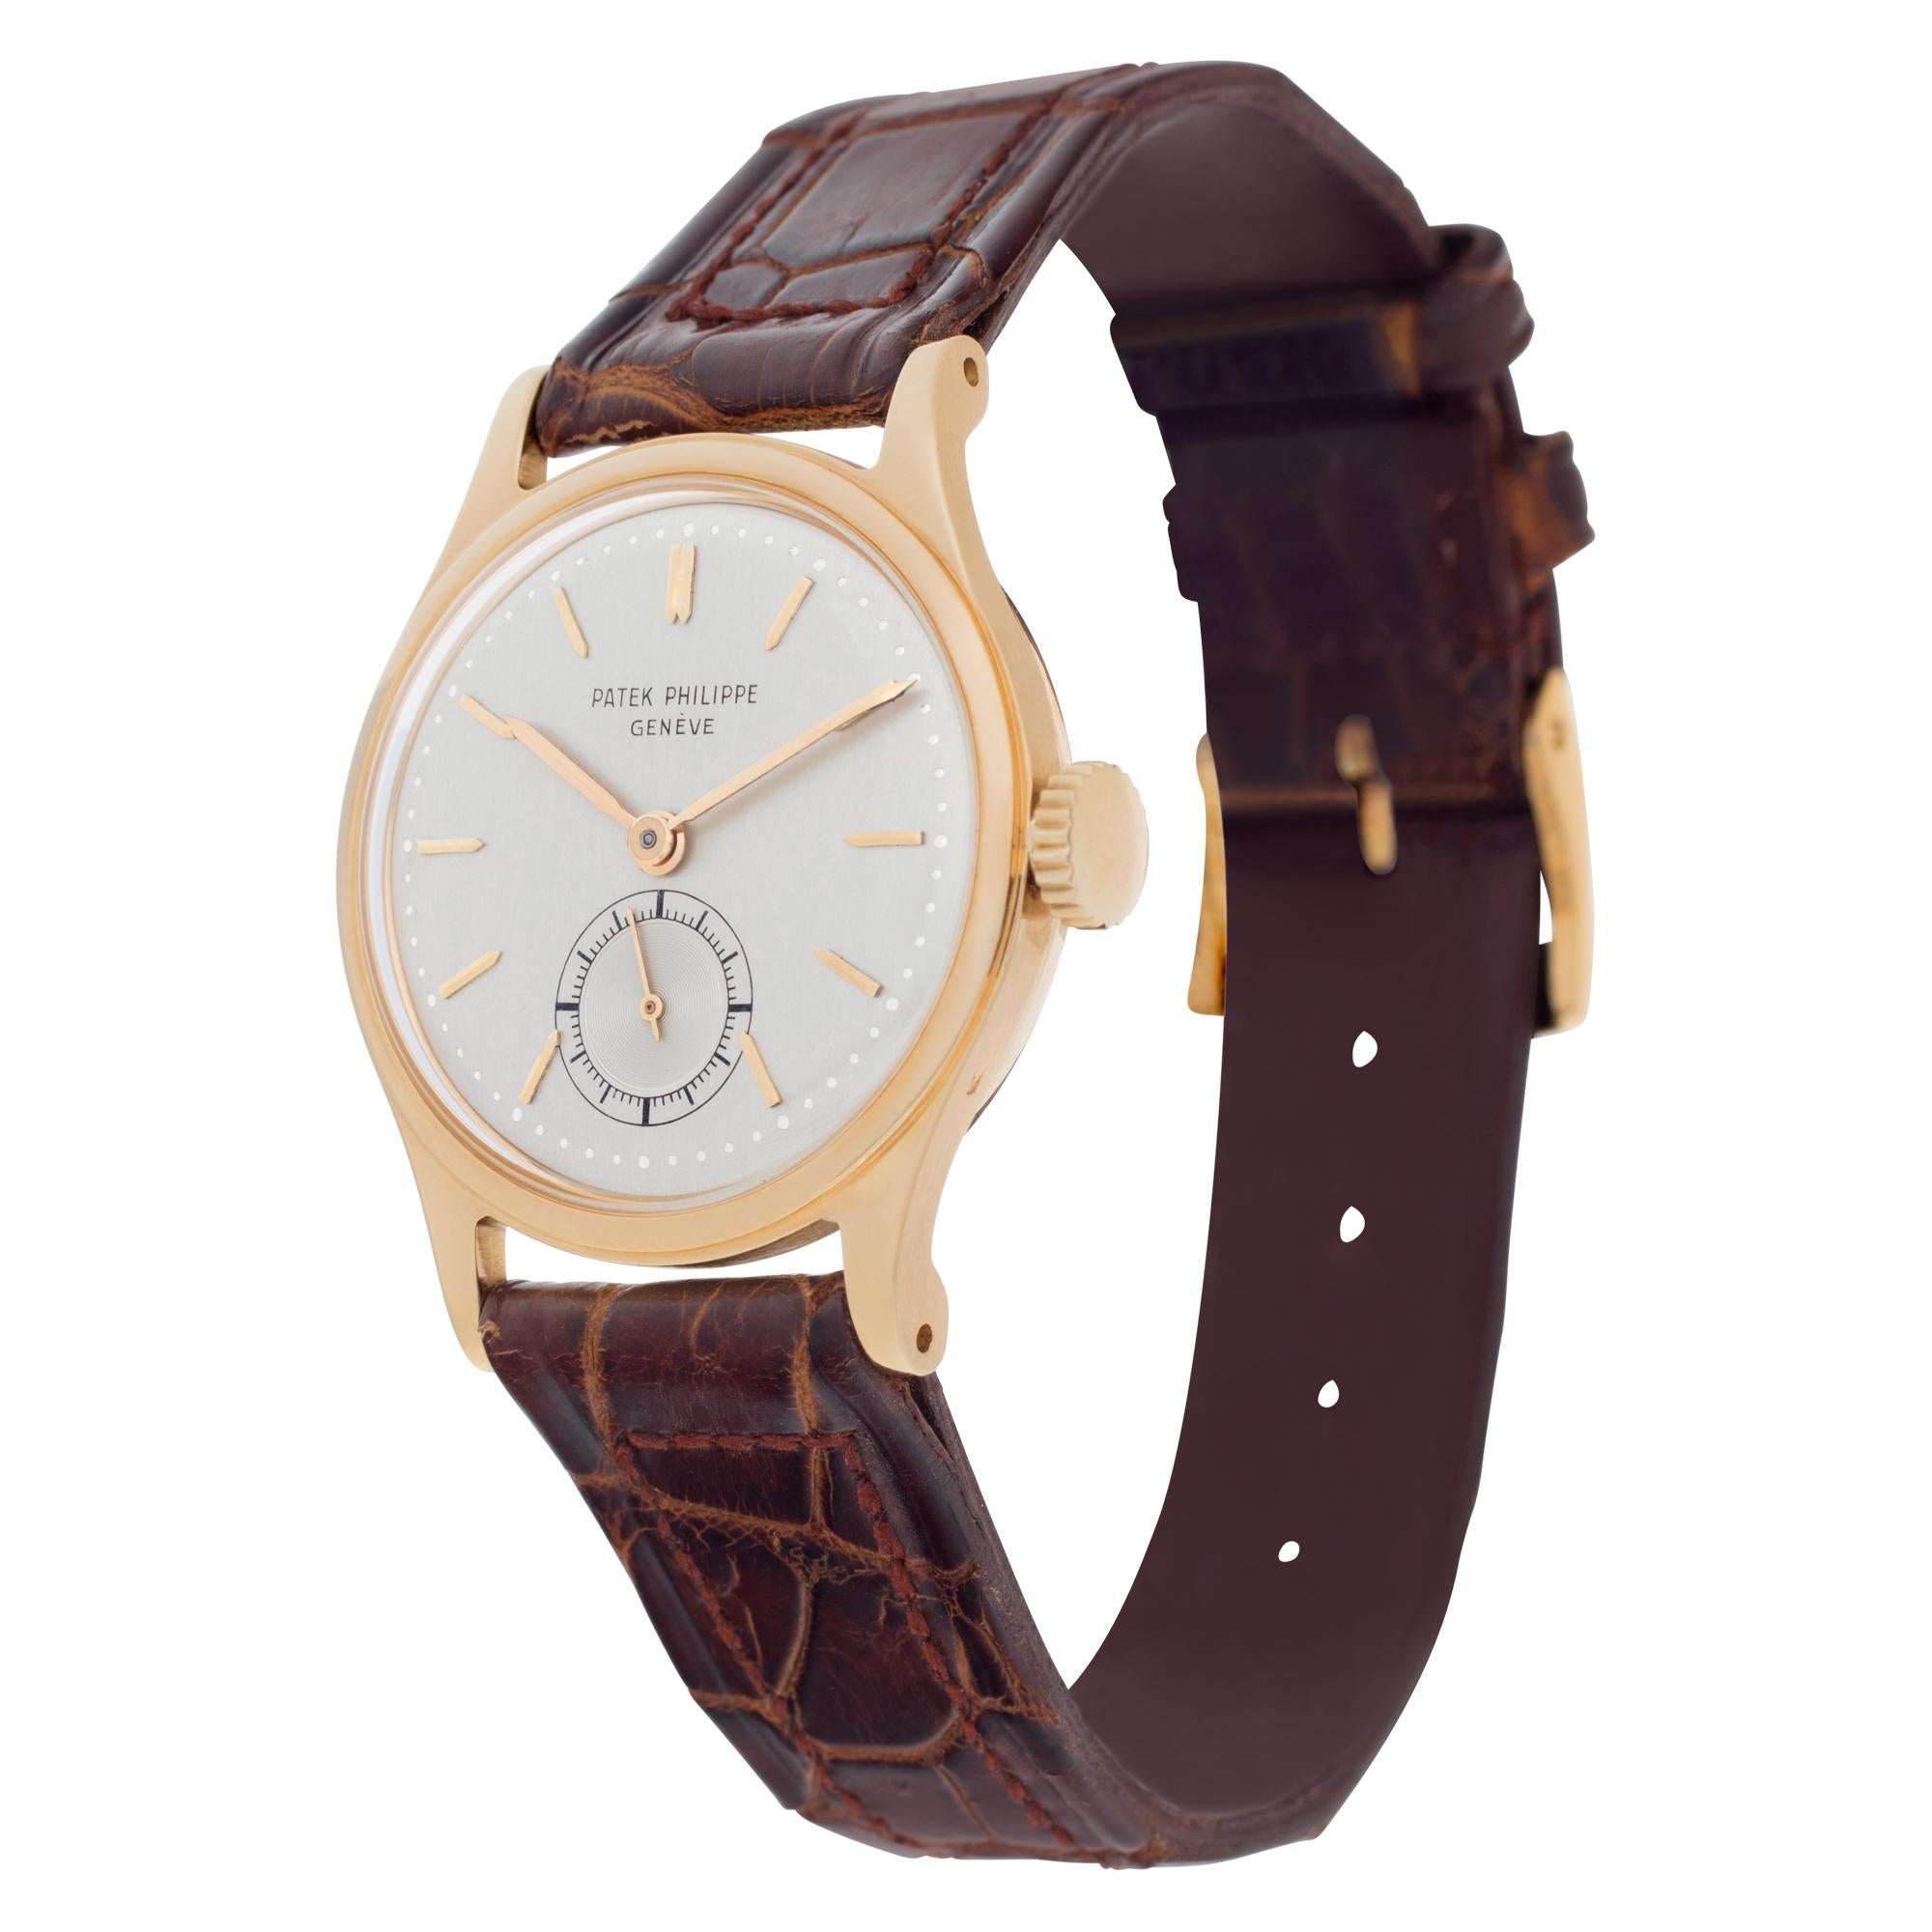 Patek Philippe Calatrava in 18k yellow gold on a brown alligator strap. Manual w/ subseconds. 30 mm case size. Ref 2451. Circa 1950s. Fine Pre-owned Patek Philippe Watch.

Certified preowned Dress Patek Philippe Calatrava 2451 watch is made out of